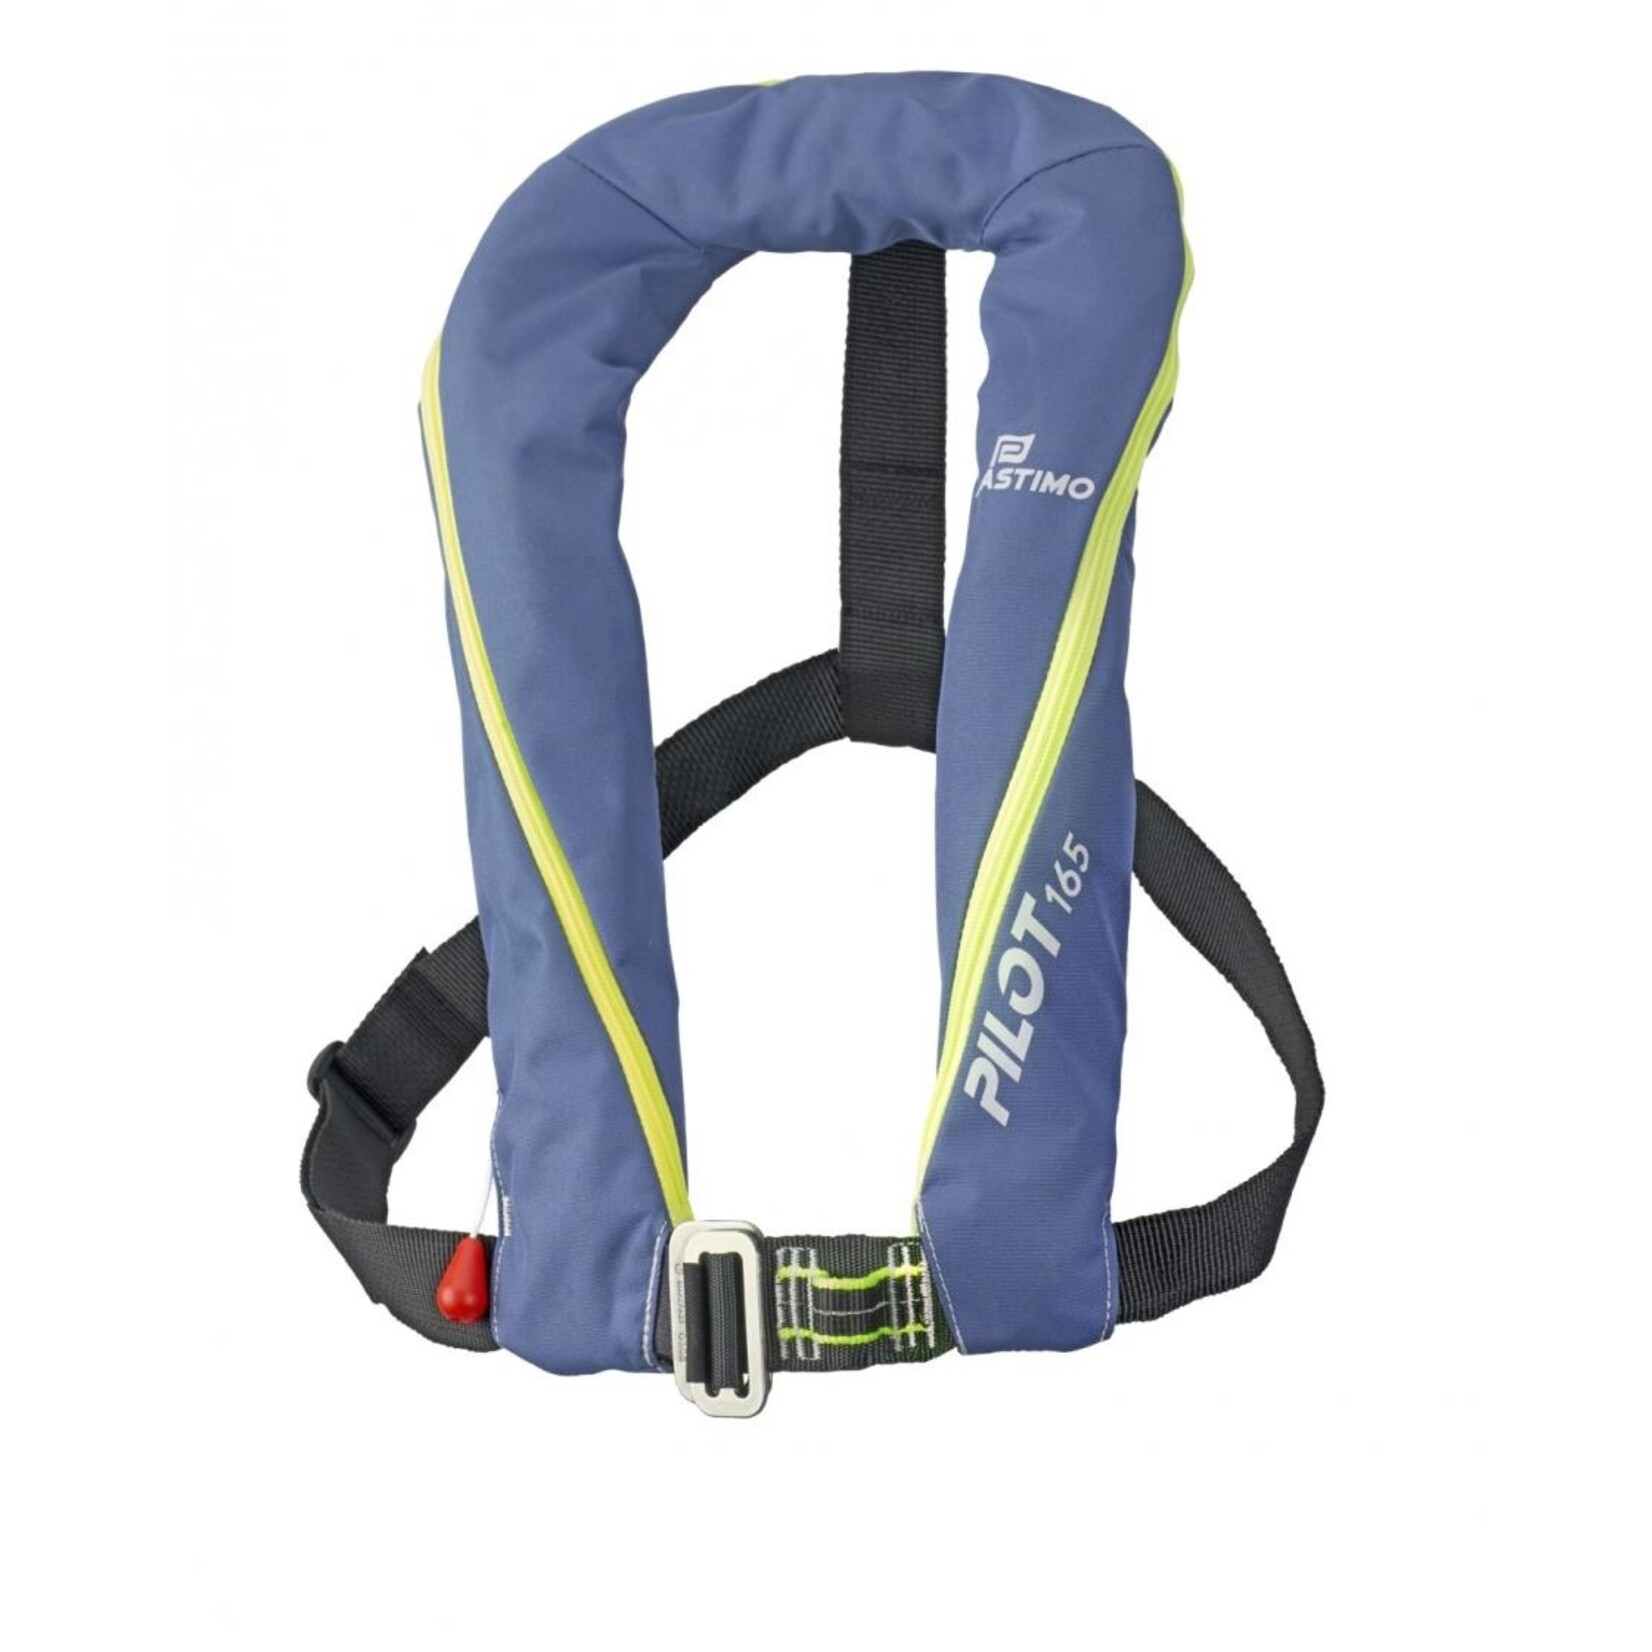 Plastimo Pilot 165 zip automatic blue with harness